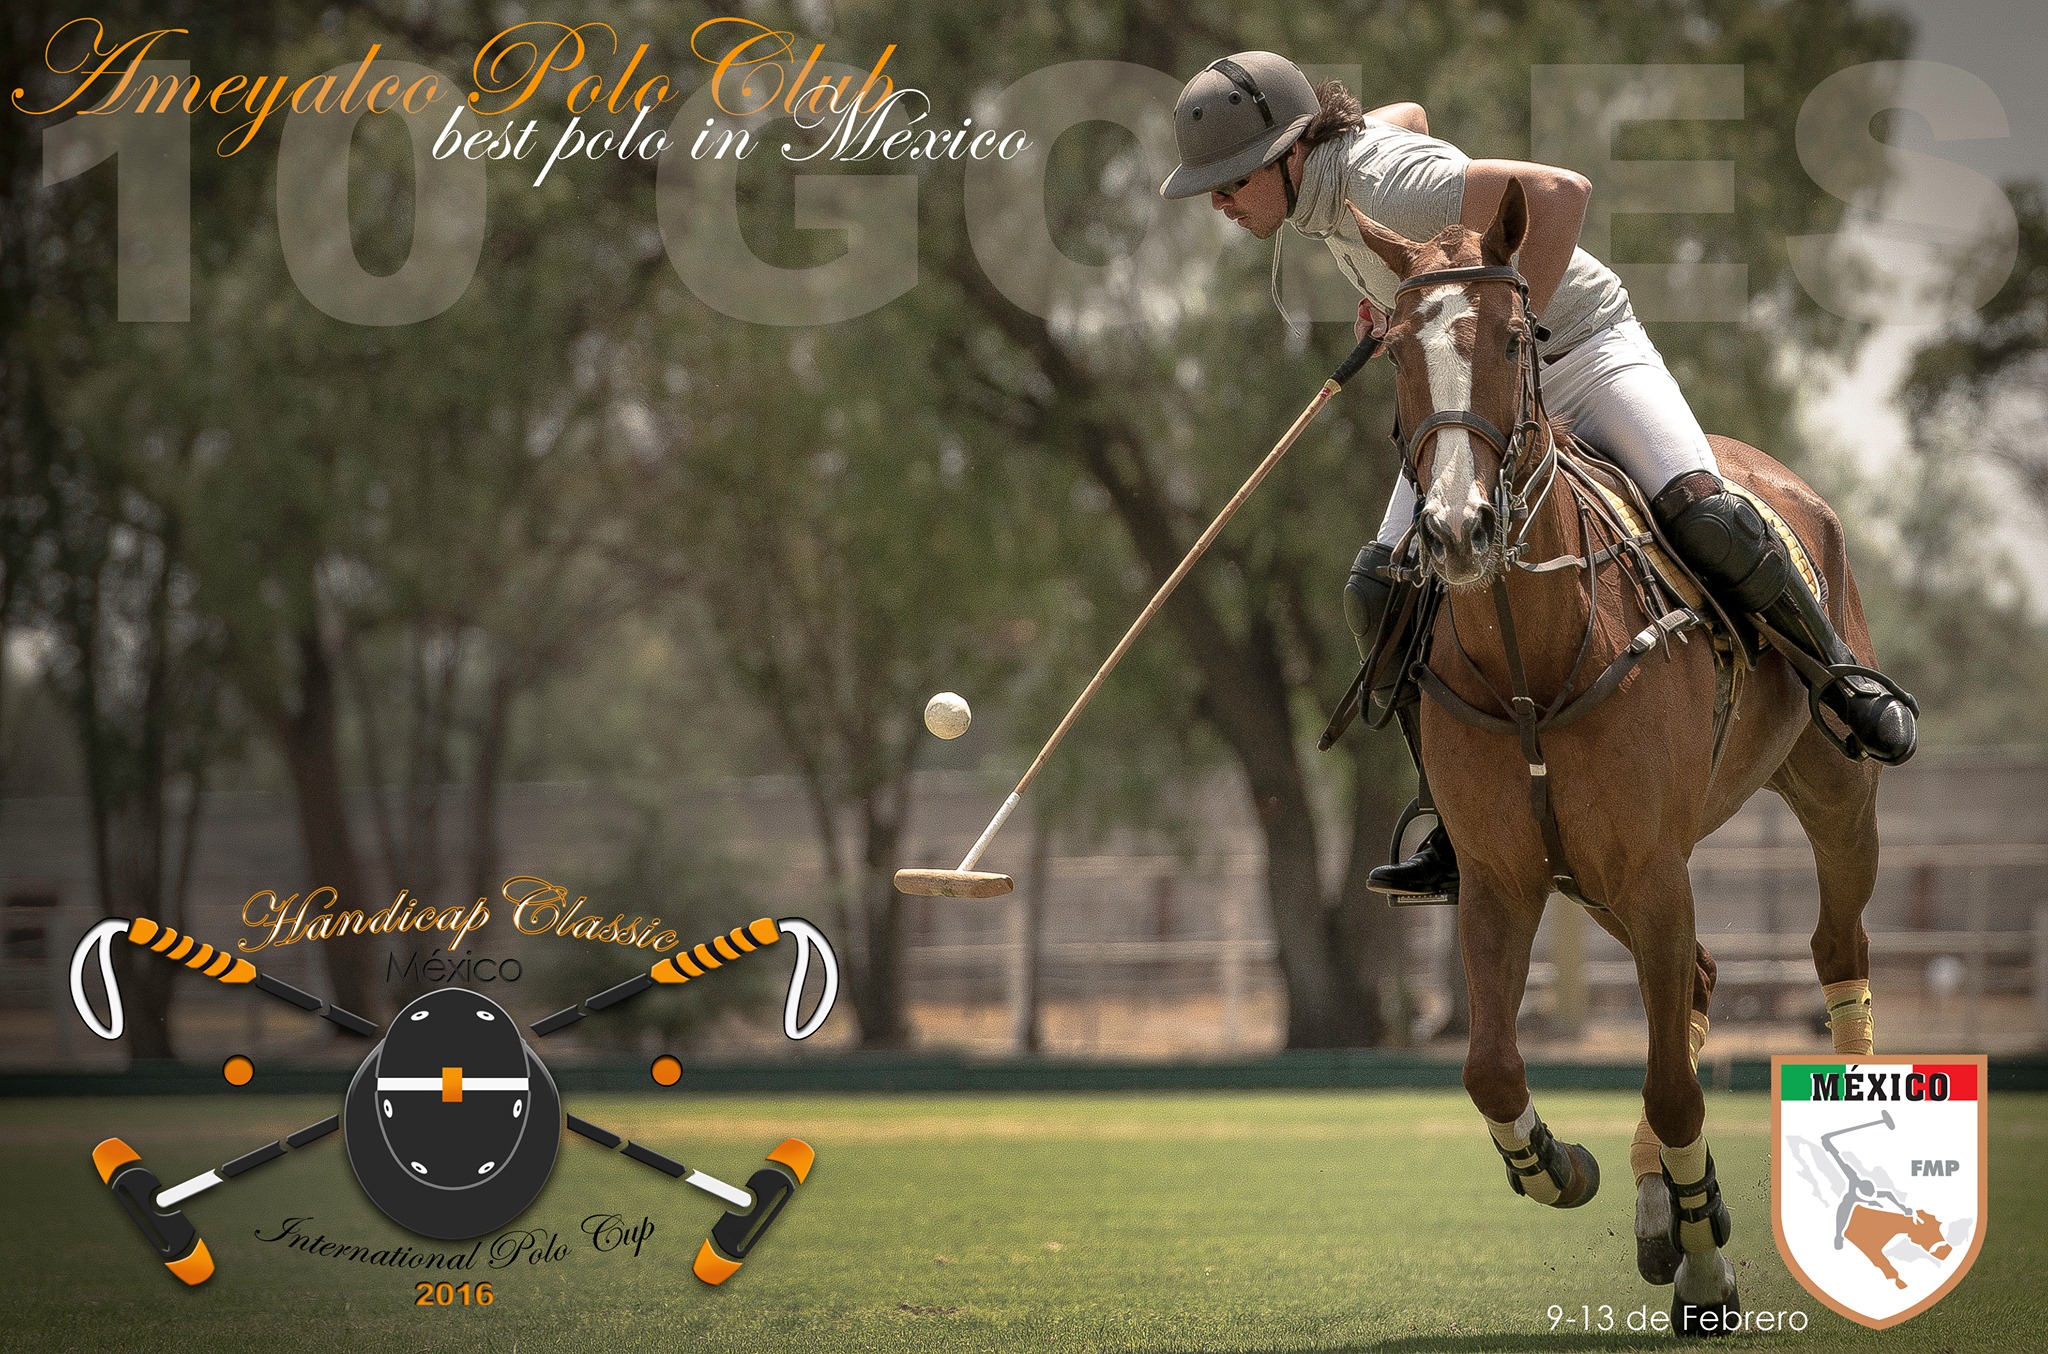 The Avra Energy Handicap Classic Polo Cup 2016 Comes To Mexico